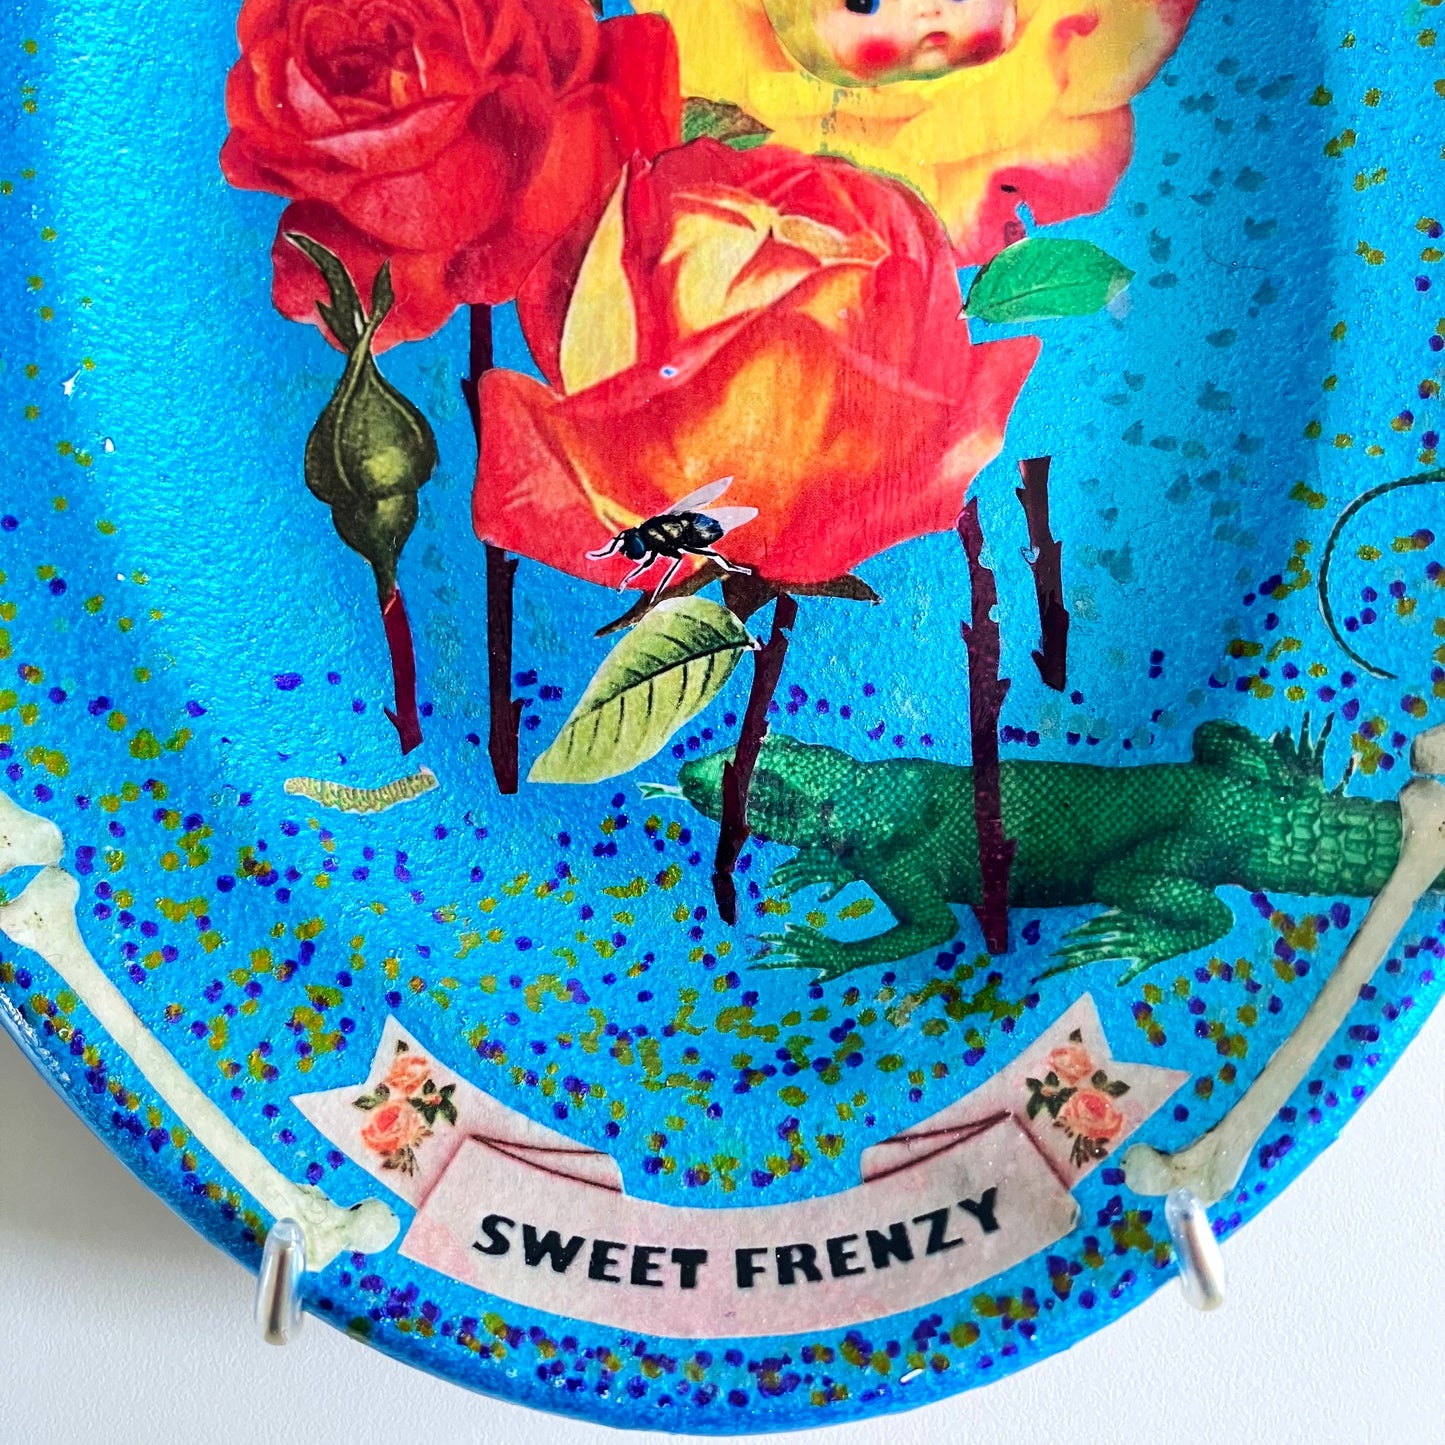 "Sweet Frenzy" Upcycled Wall Plate by House of Frisson, featuring some vintage flowers, moths, a fly, and a lizard, against a turquoise background and a frame of bones. Closeup detail showing the collage.